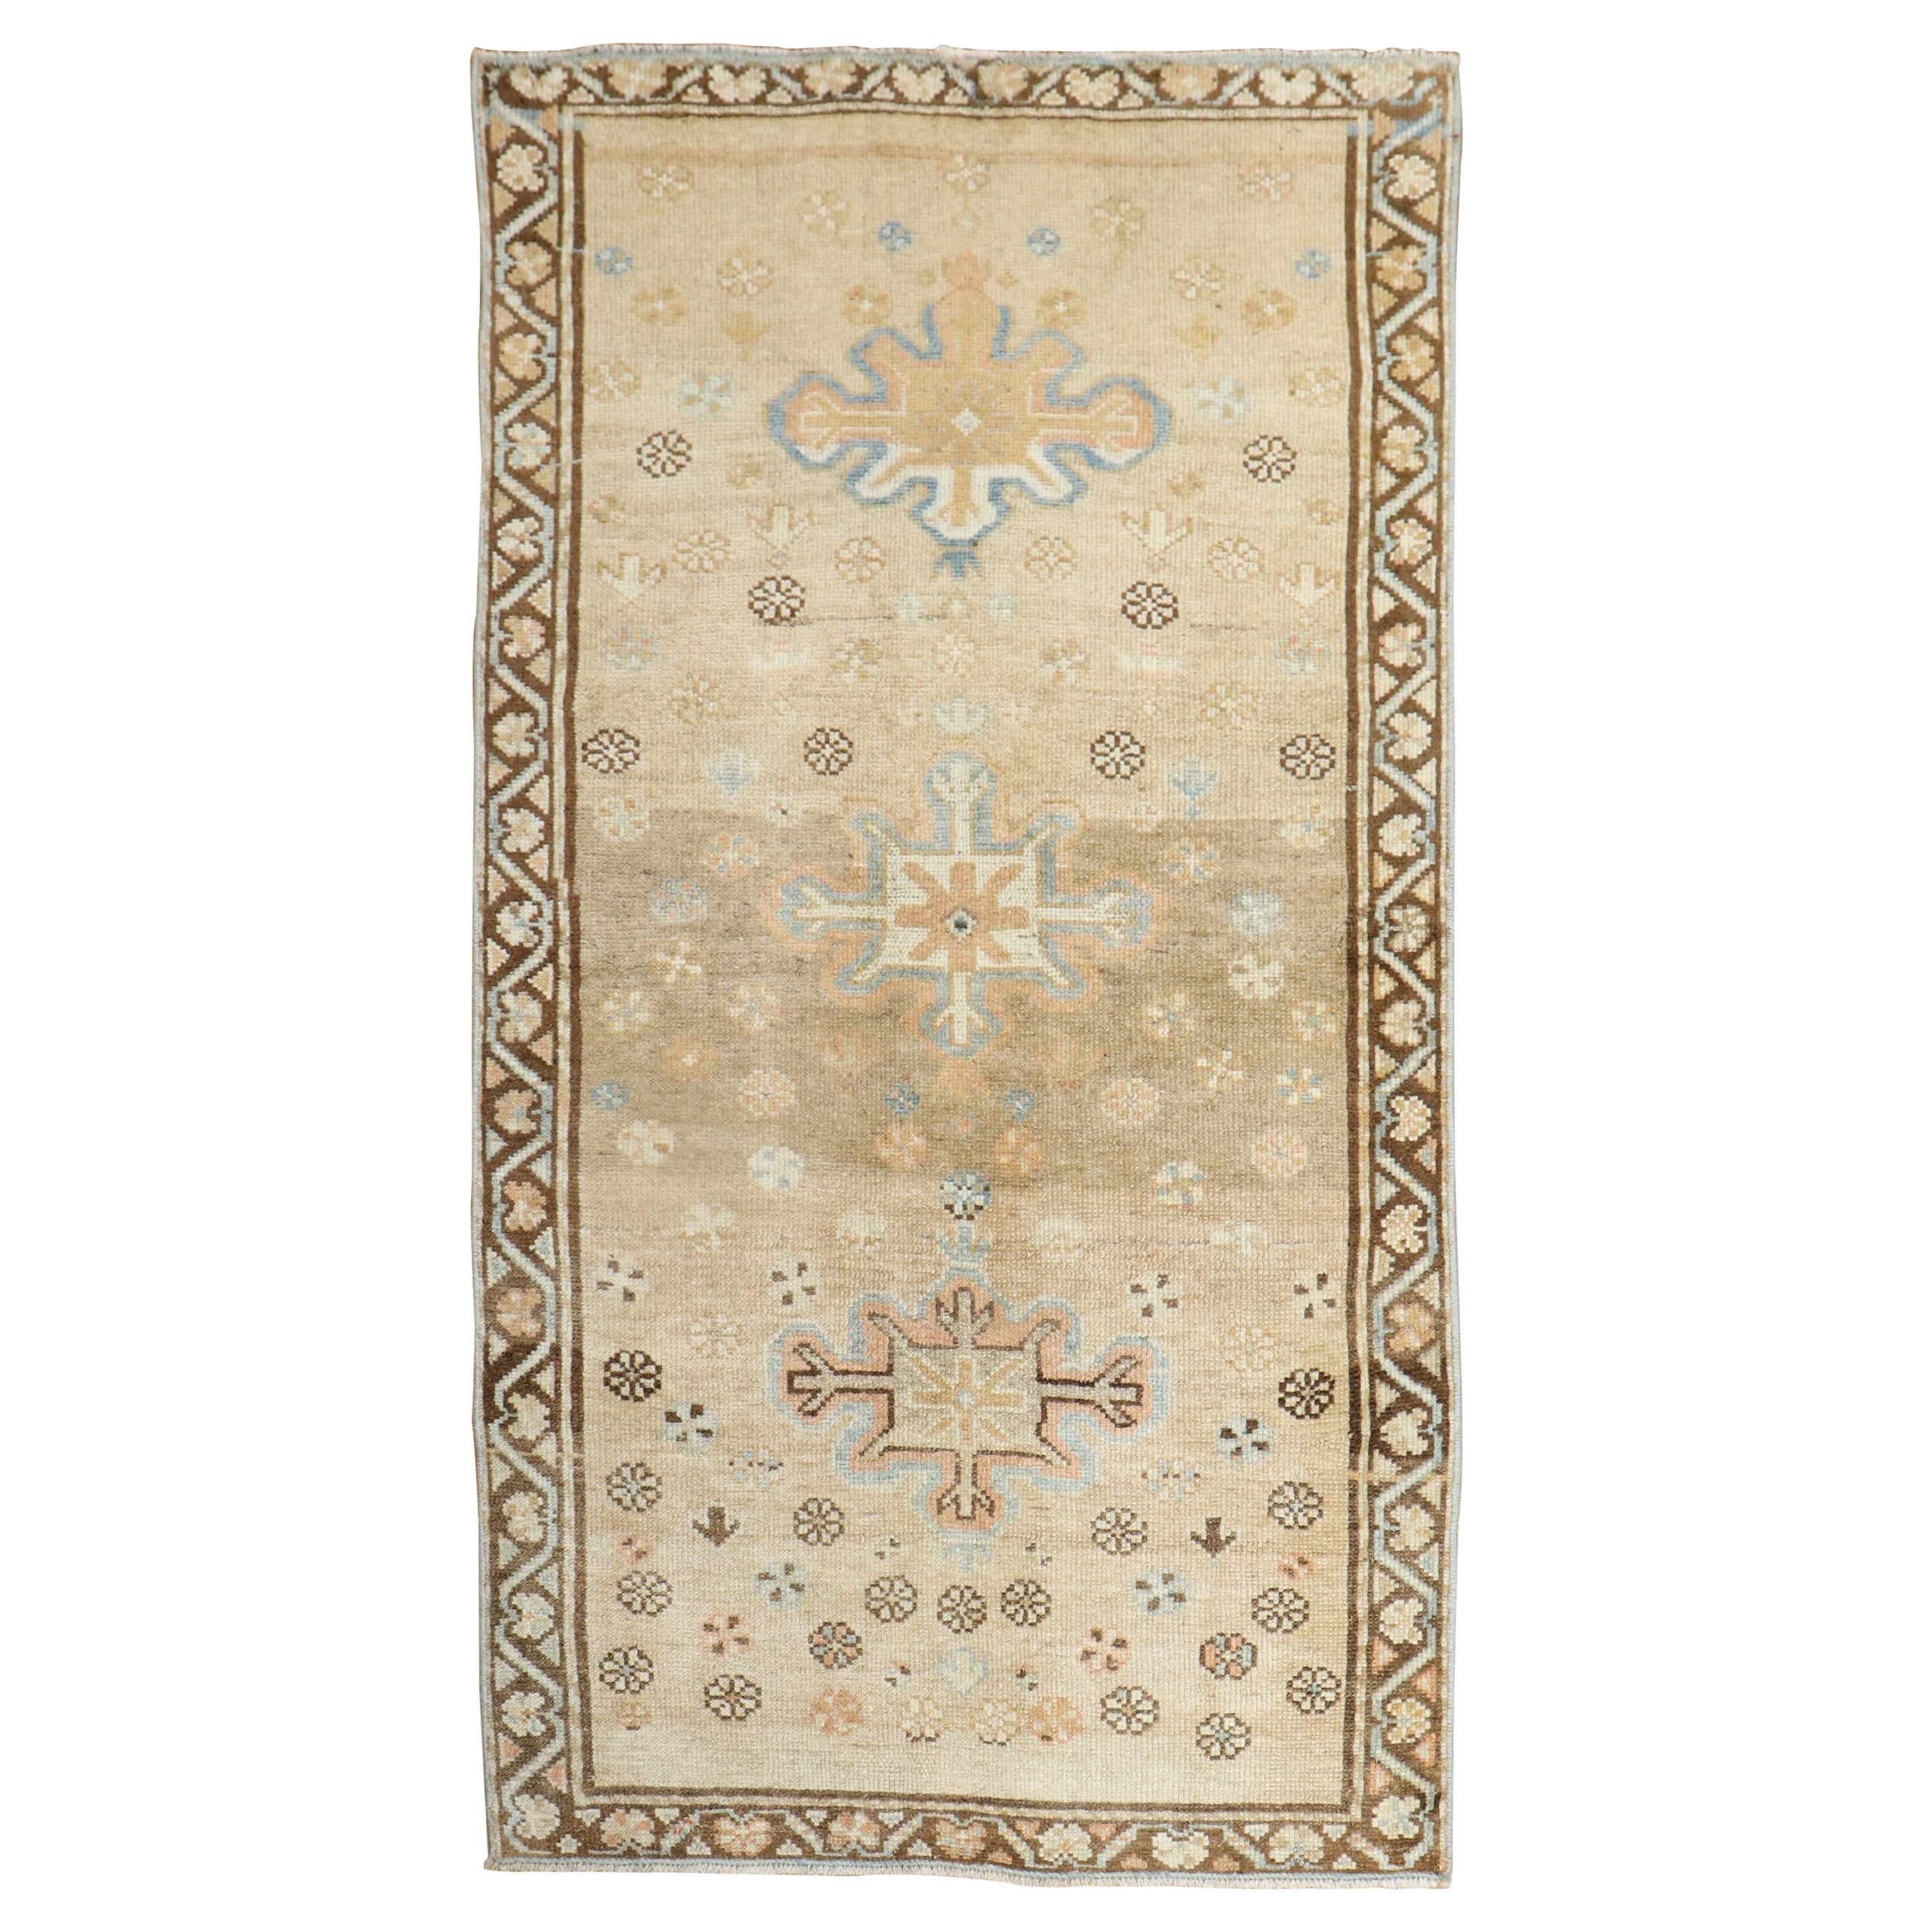 The Collective Antique Persian Light Brown Scatter Rug (tapis de dispersion)